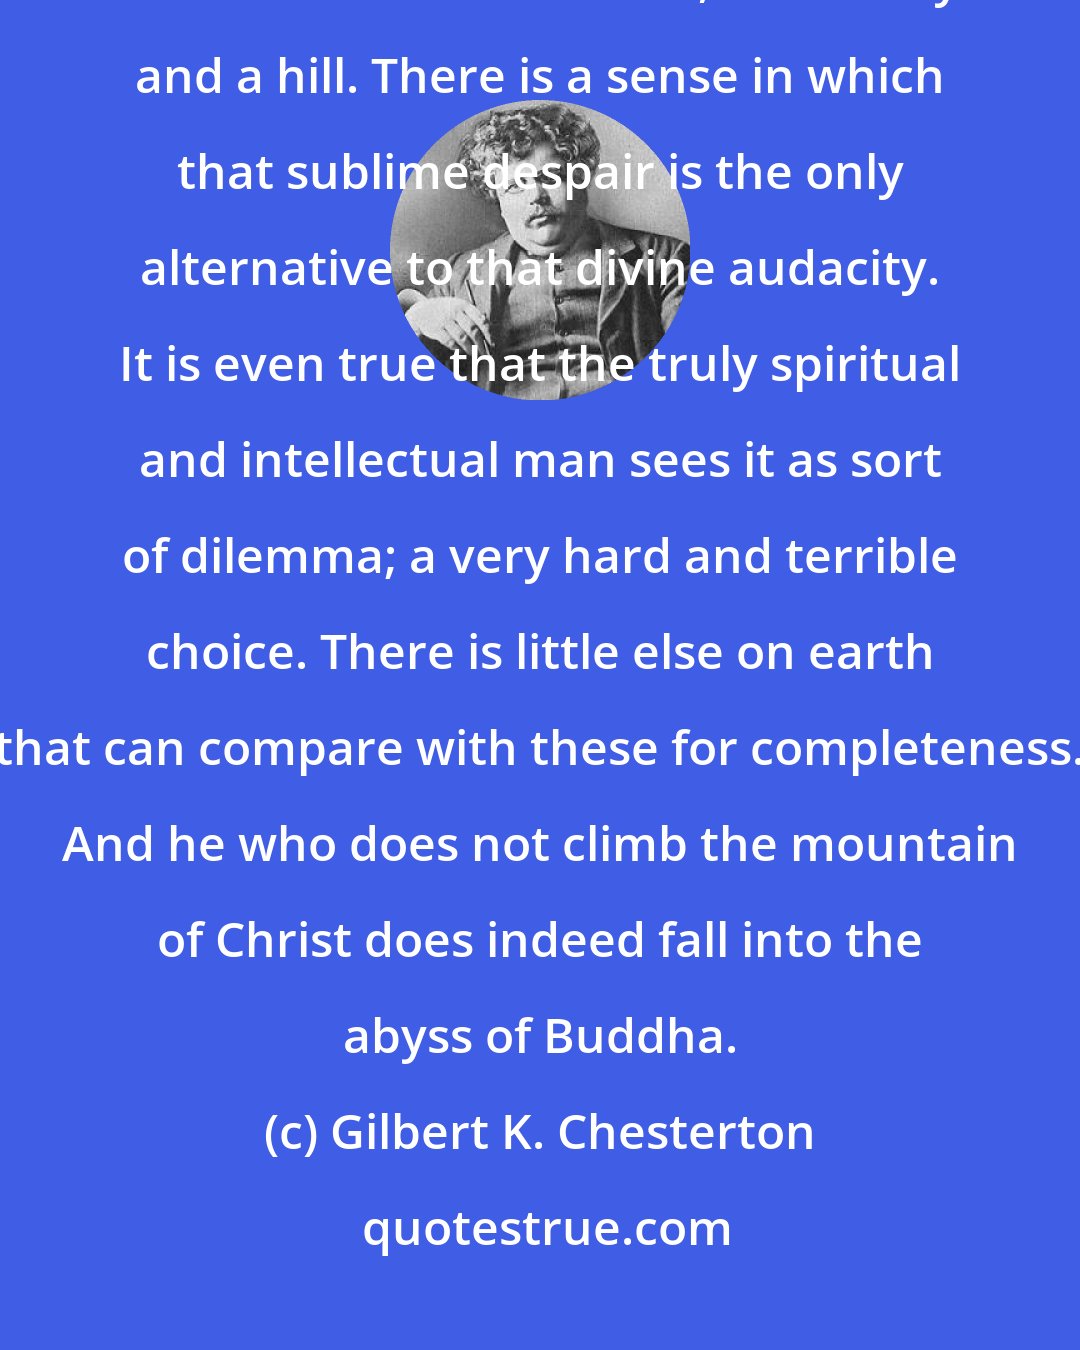 Gilbert K. Chesterton: [Buddhism and Christianity] are in one sense parallel and equal; as a mound and a hollow, as a valley and a hill. There is a sense in which that sublime despair is the only alternative to that divine audacity. It is even true that the truly spiritual and intellectual man sees it as sort of dilemma; a very hard and terrible choice. There is little else on earth that can compare with these for completeness. And he who does not climb the mountain of Christ does indeed fall into the abyss of Buddha.